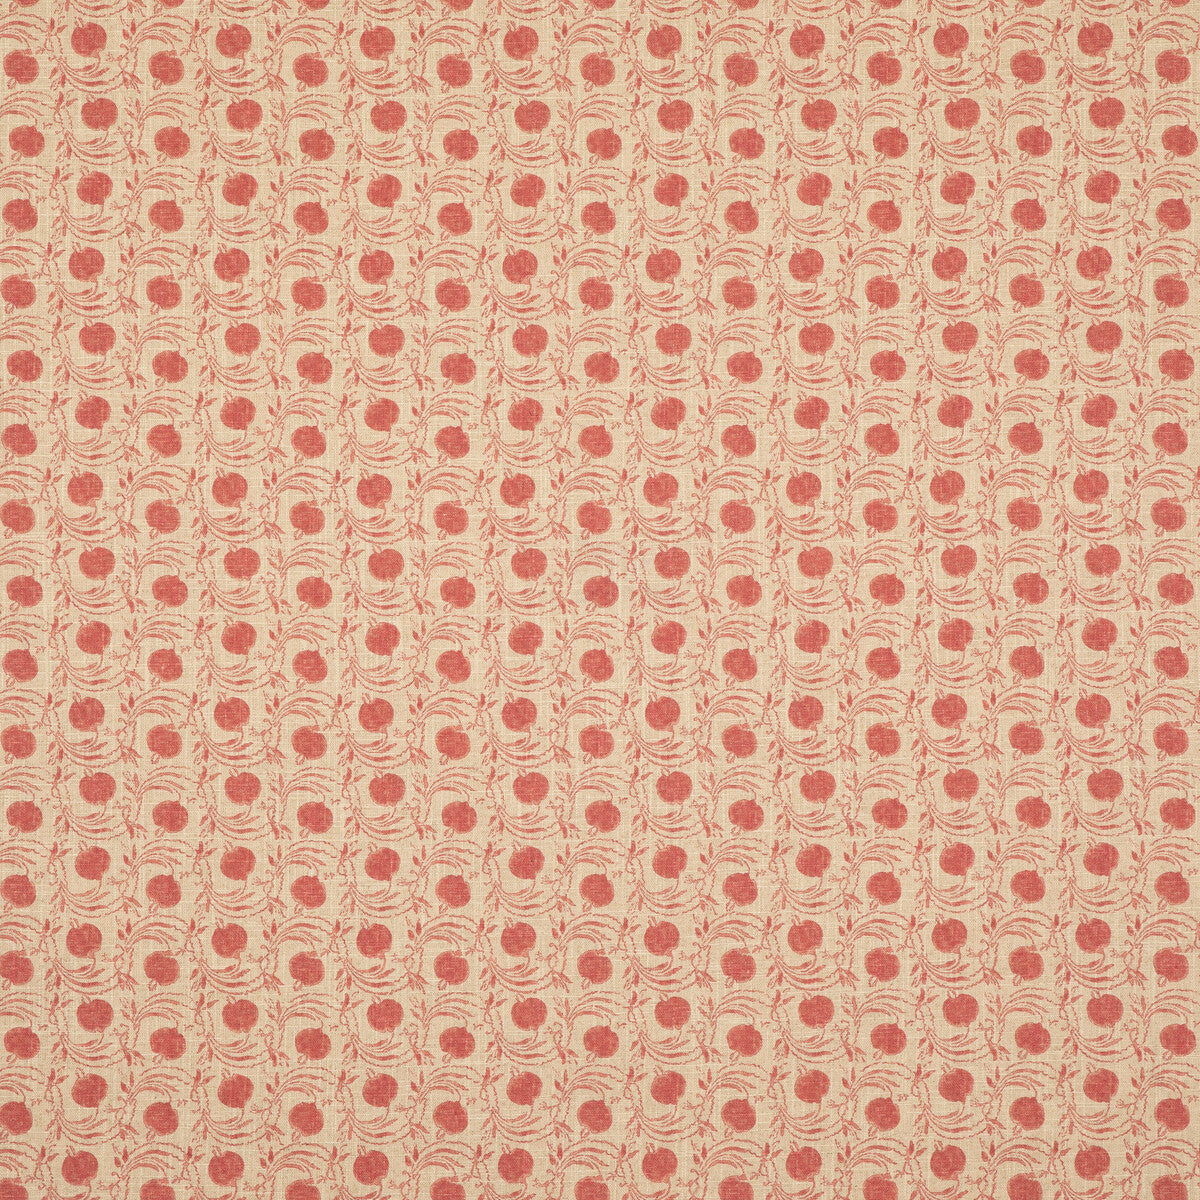 Seed Pod fabric in red color - pattern BP10824.1.0 - by G P &amp; J Baker in the Coromandel Small Prints collection